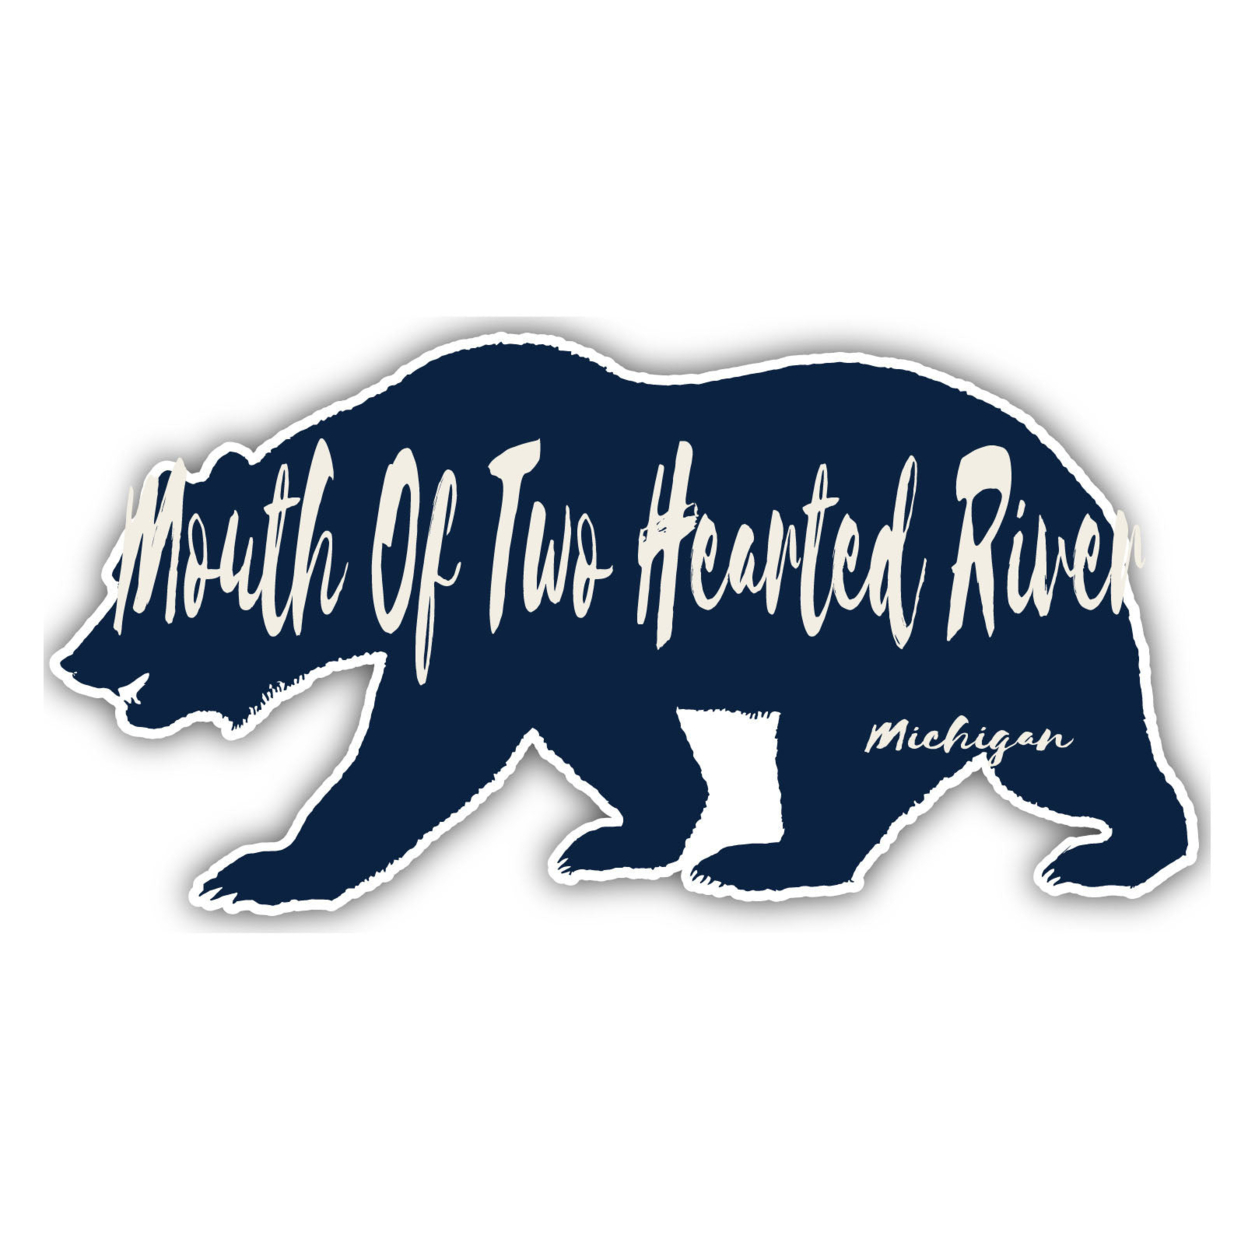 Mouth Of Two Hearted River Michigan Souvenir Decorative Stickers (Choose Theme And Size) - Single Unit, 2-Inch, Bear